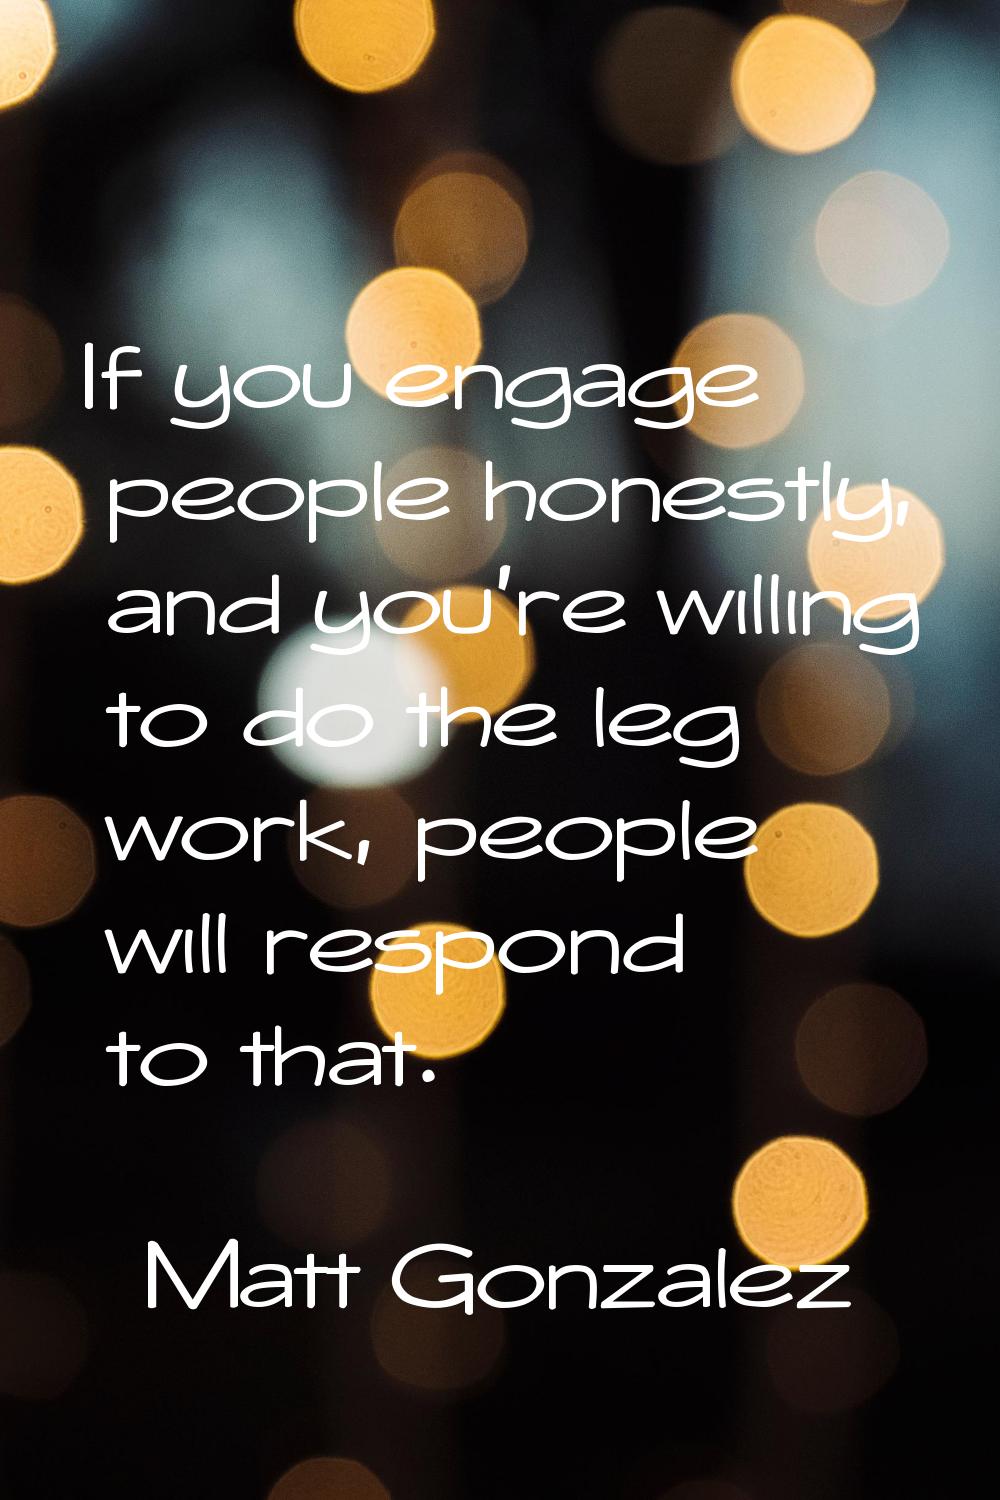 If you engage people honestly, and you're willing to do the leg work, people will respond to that.